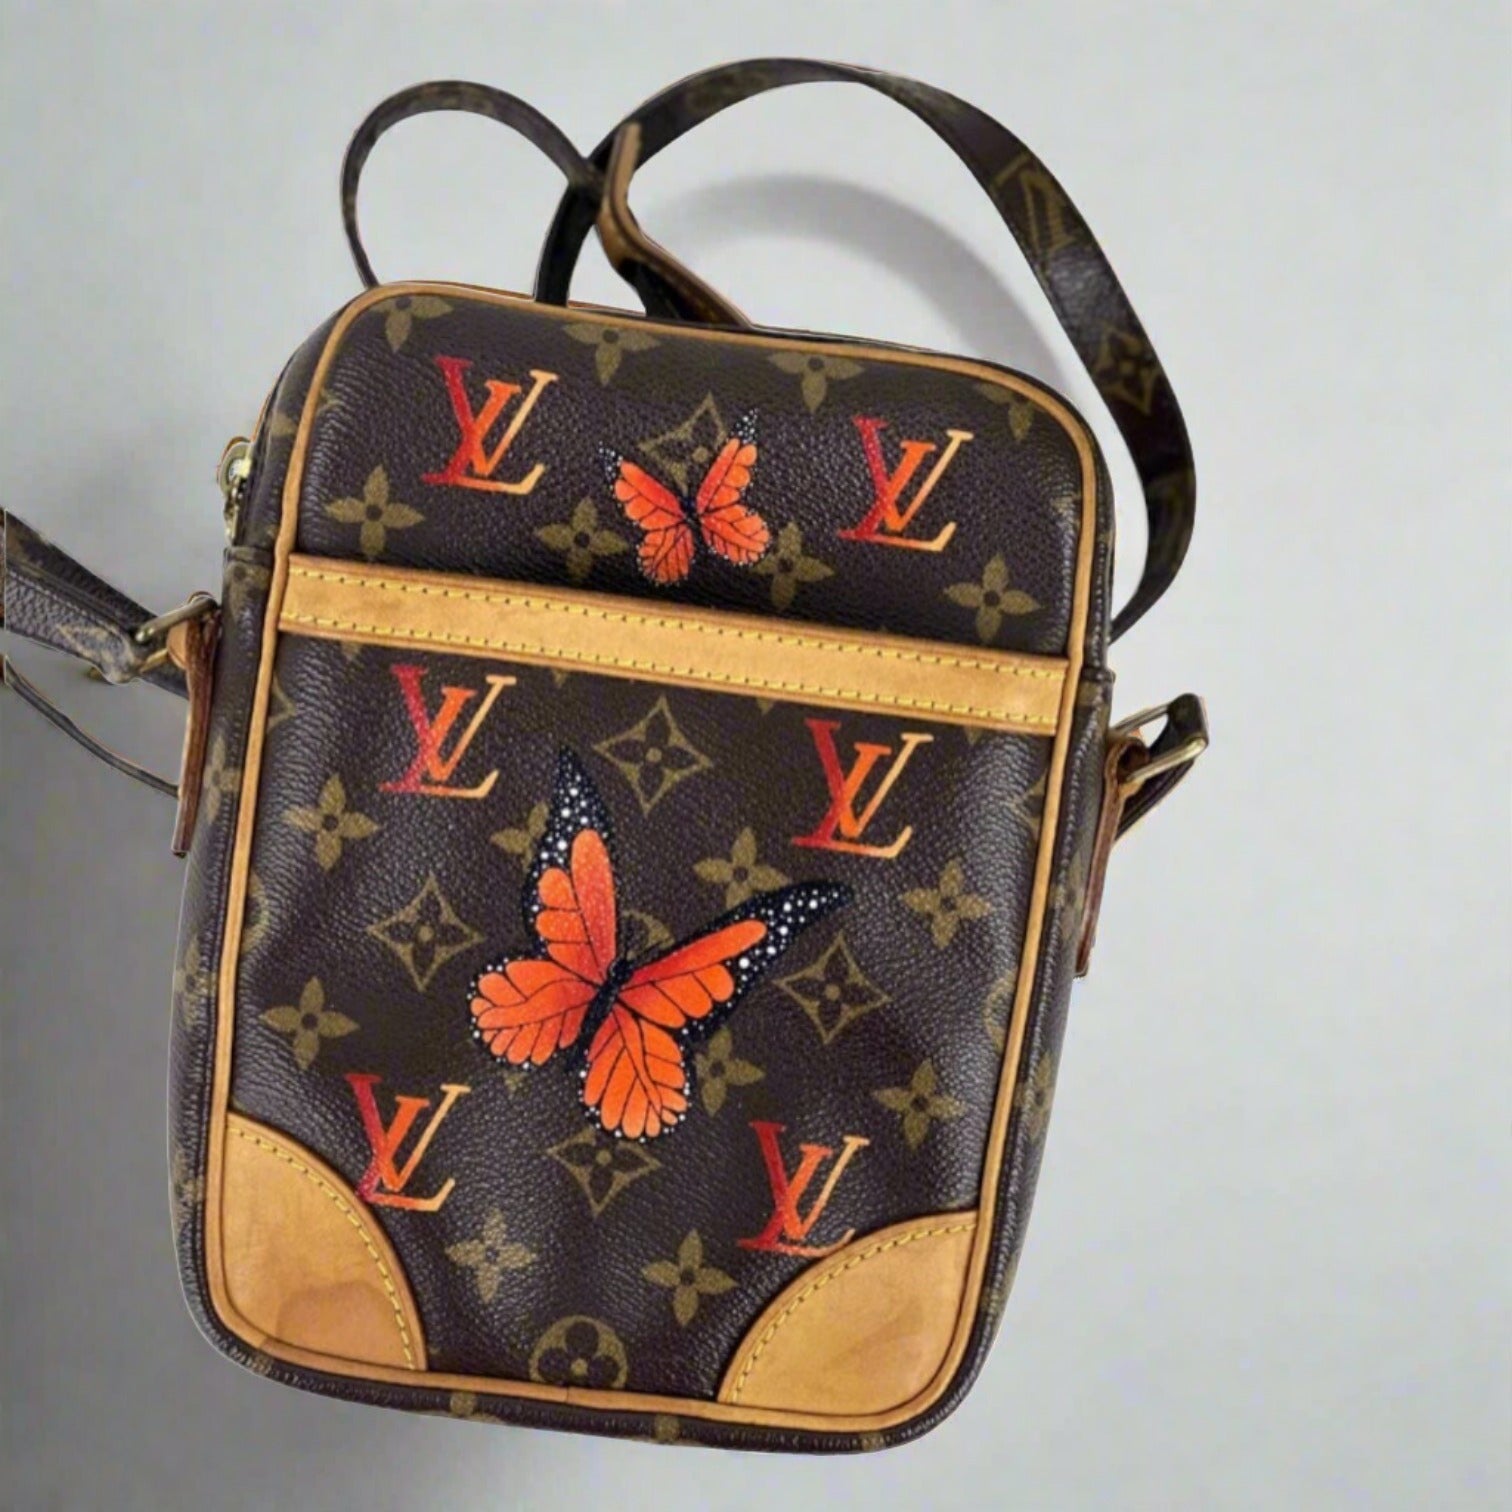 Vintage LV Danube Crossbody with Flower and Butterfly Print Bag